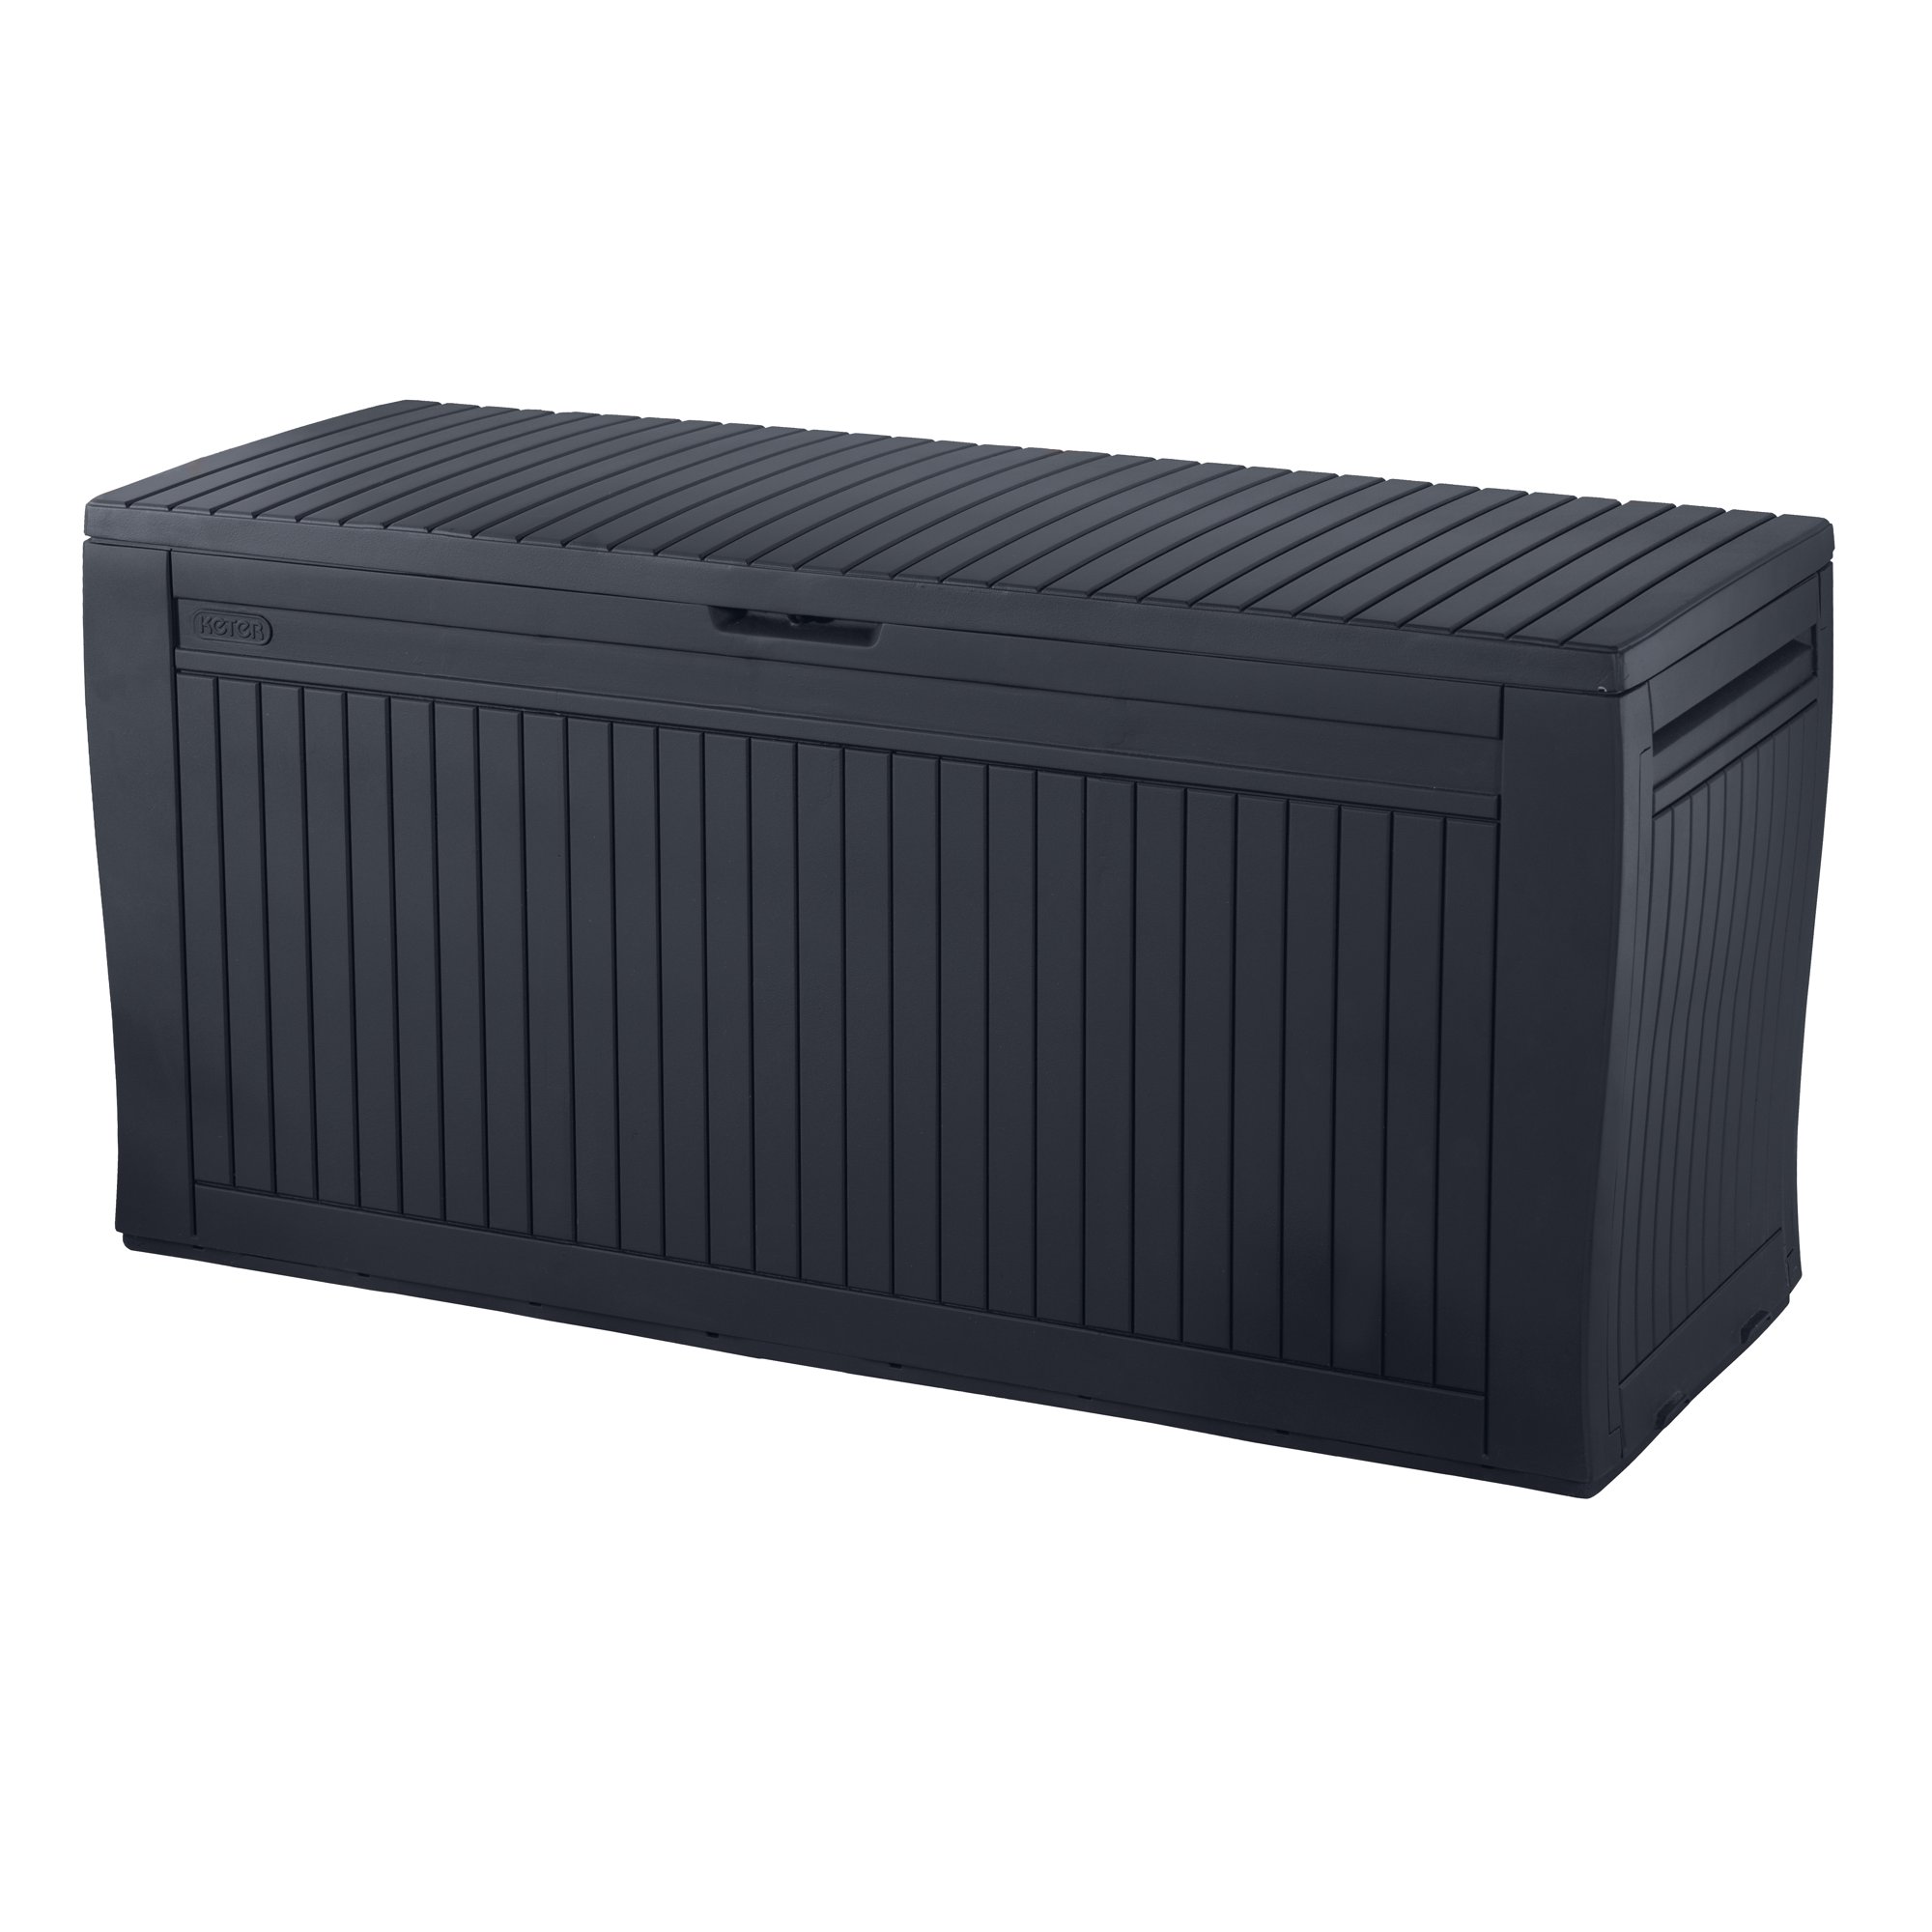 71-Gal Keter Comfy Outdoor Storage Resin Deck Box (Anthracite Gray) $57 + Free Shipping